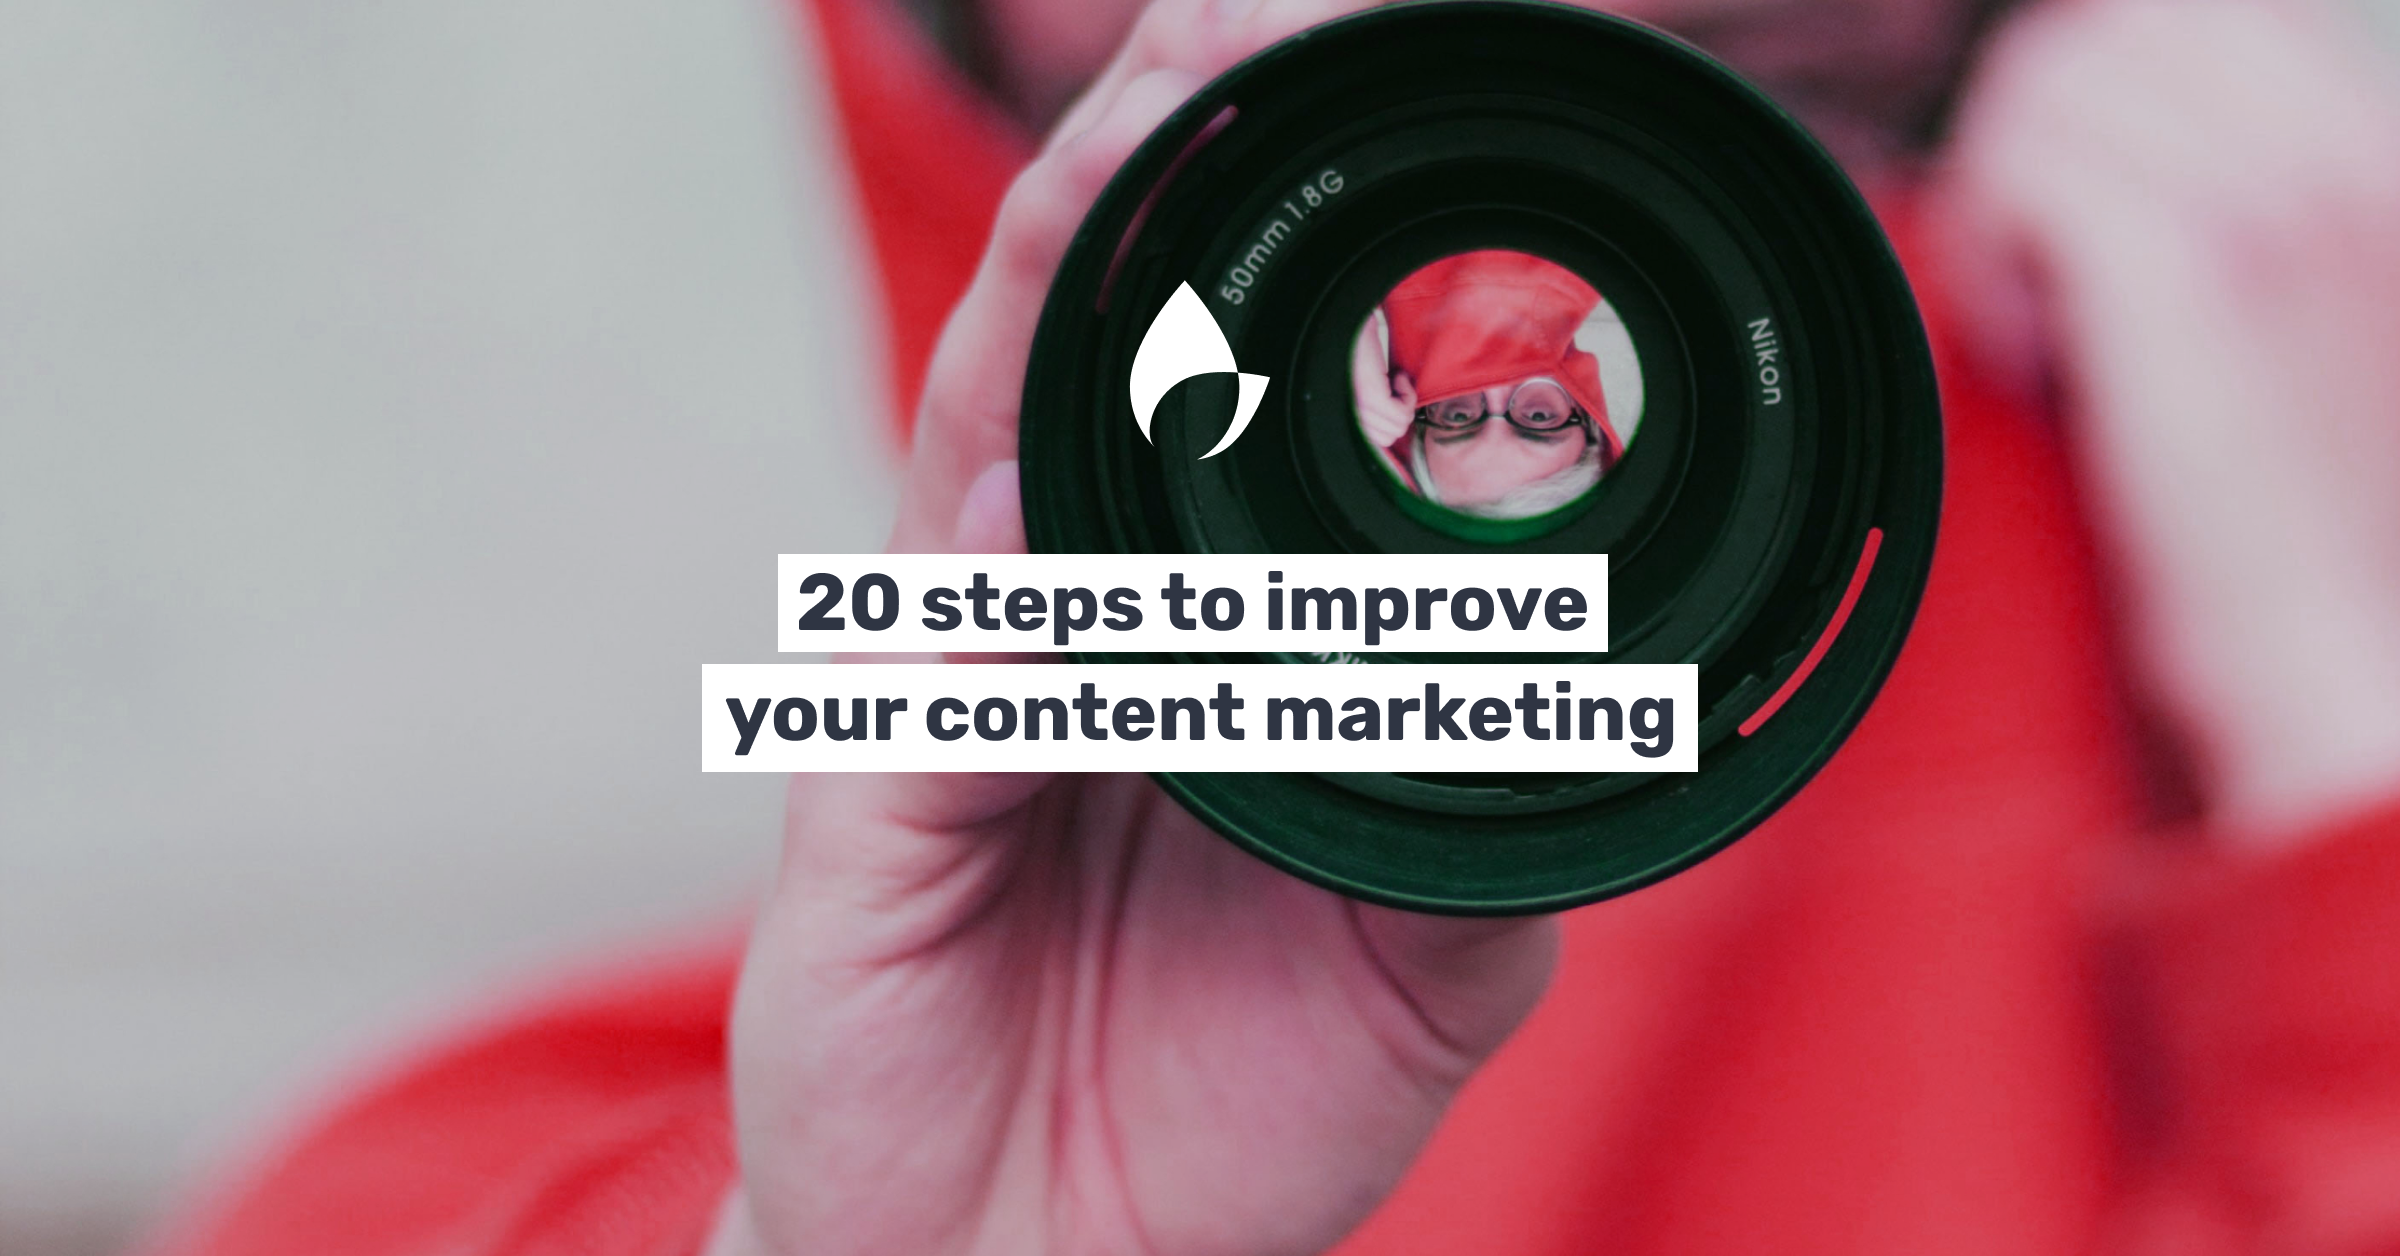 20 steps to improve your content marketing 